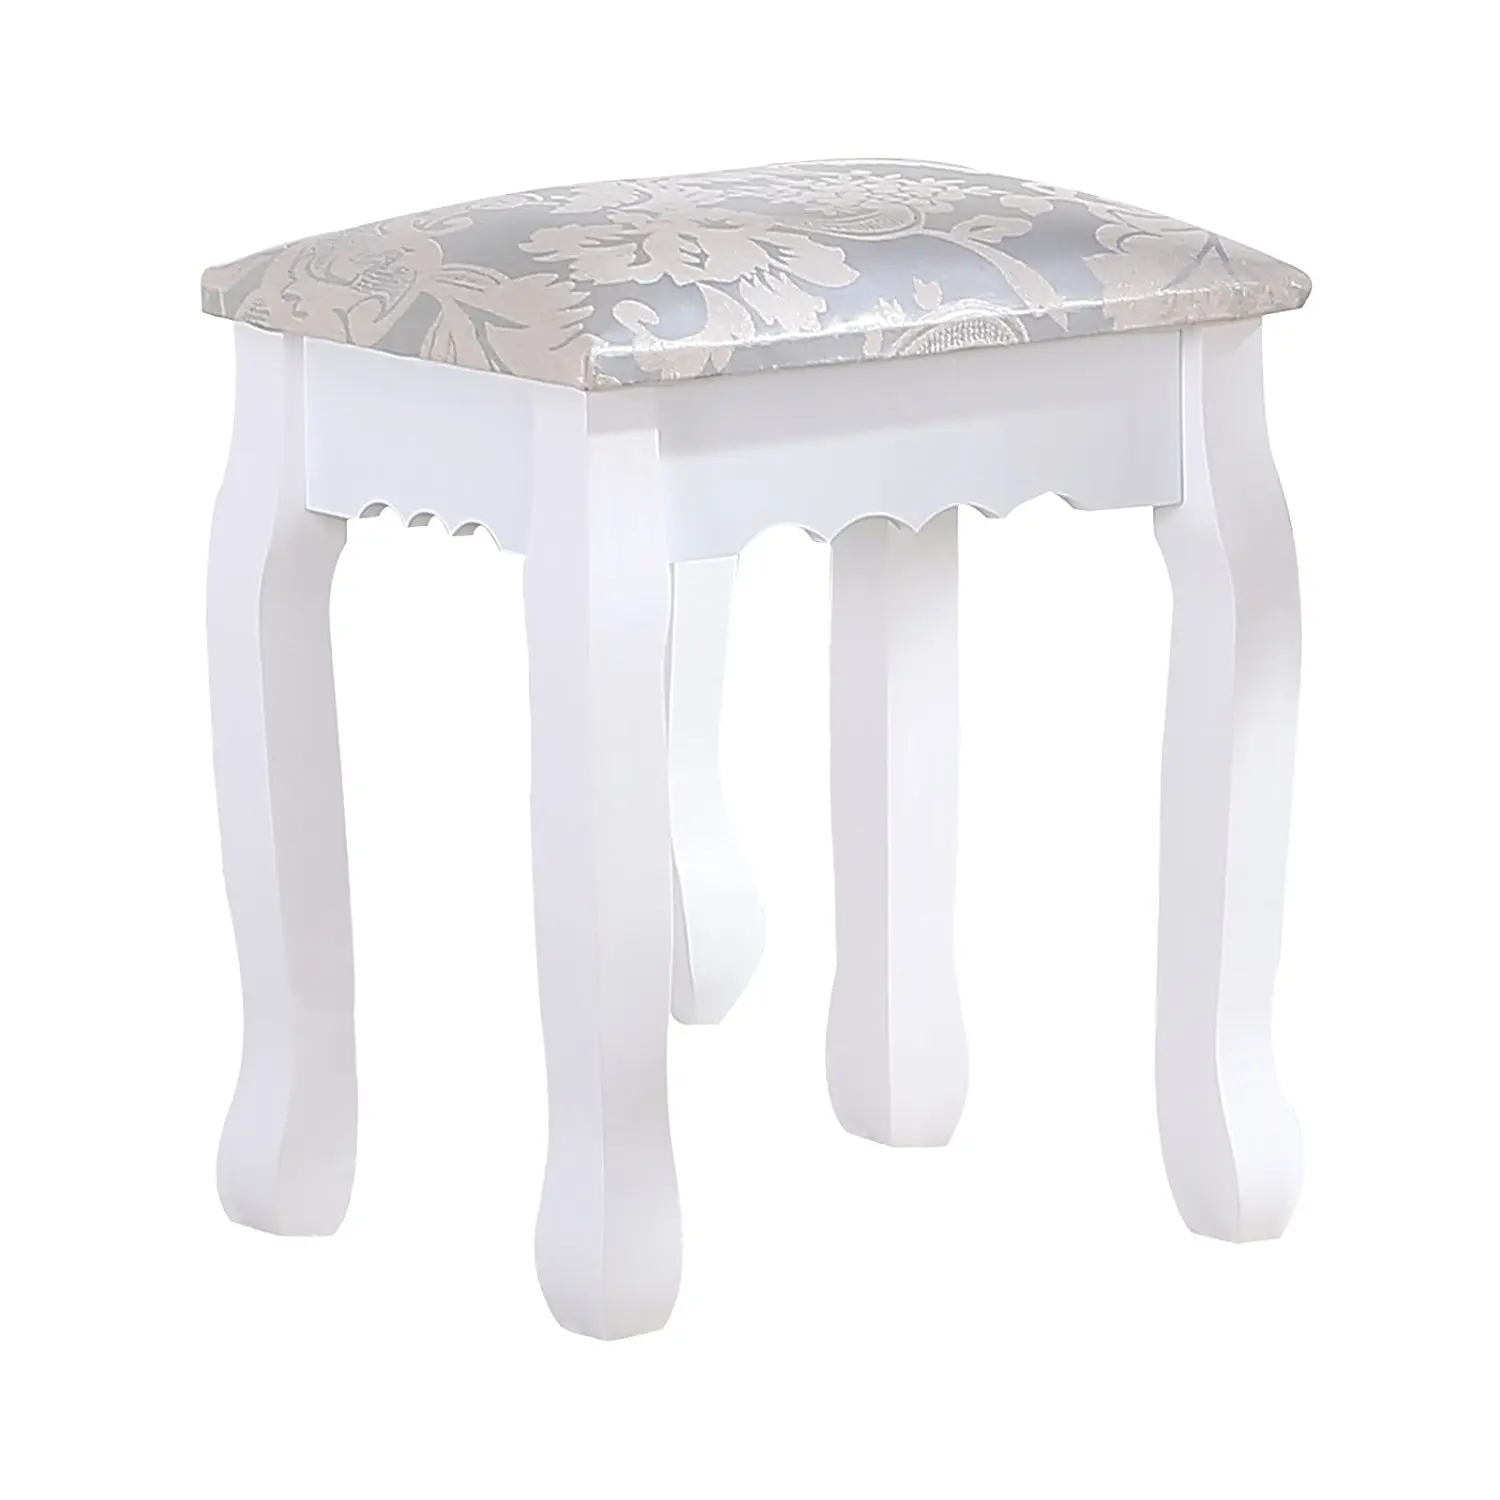 Details about   Upholstered Velvet Dressing Table Stool Chair Makeup Padded Bedroom Piano Stools 